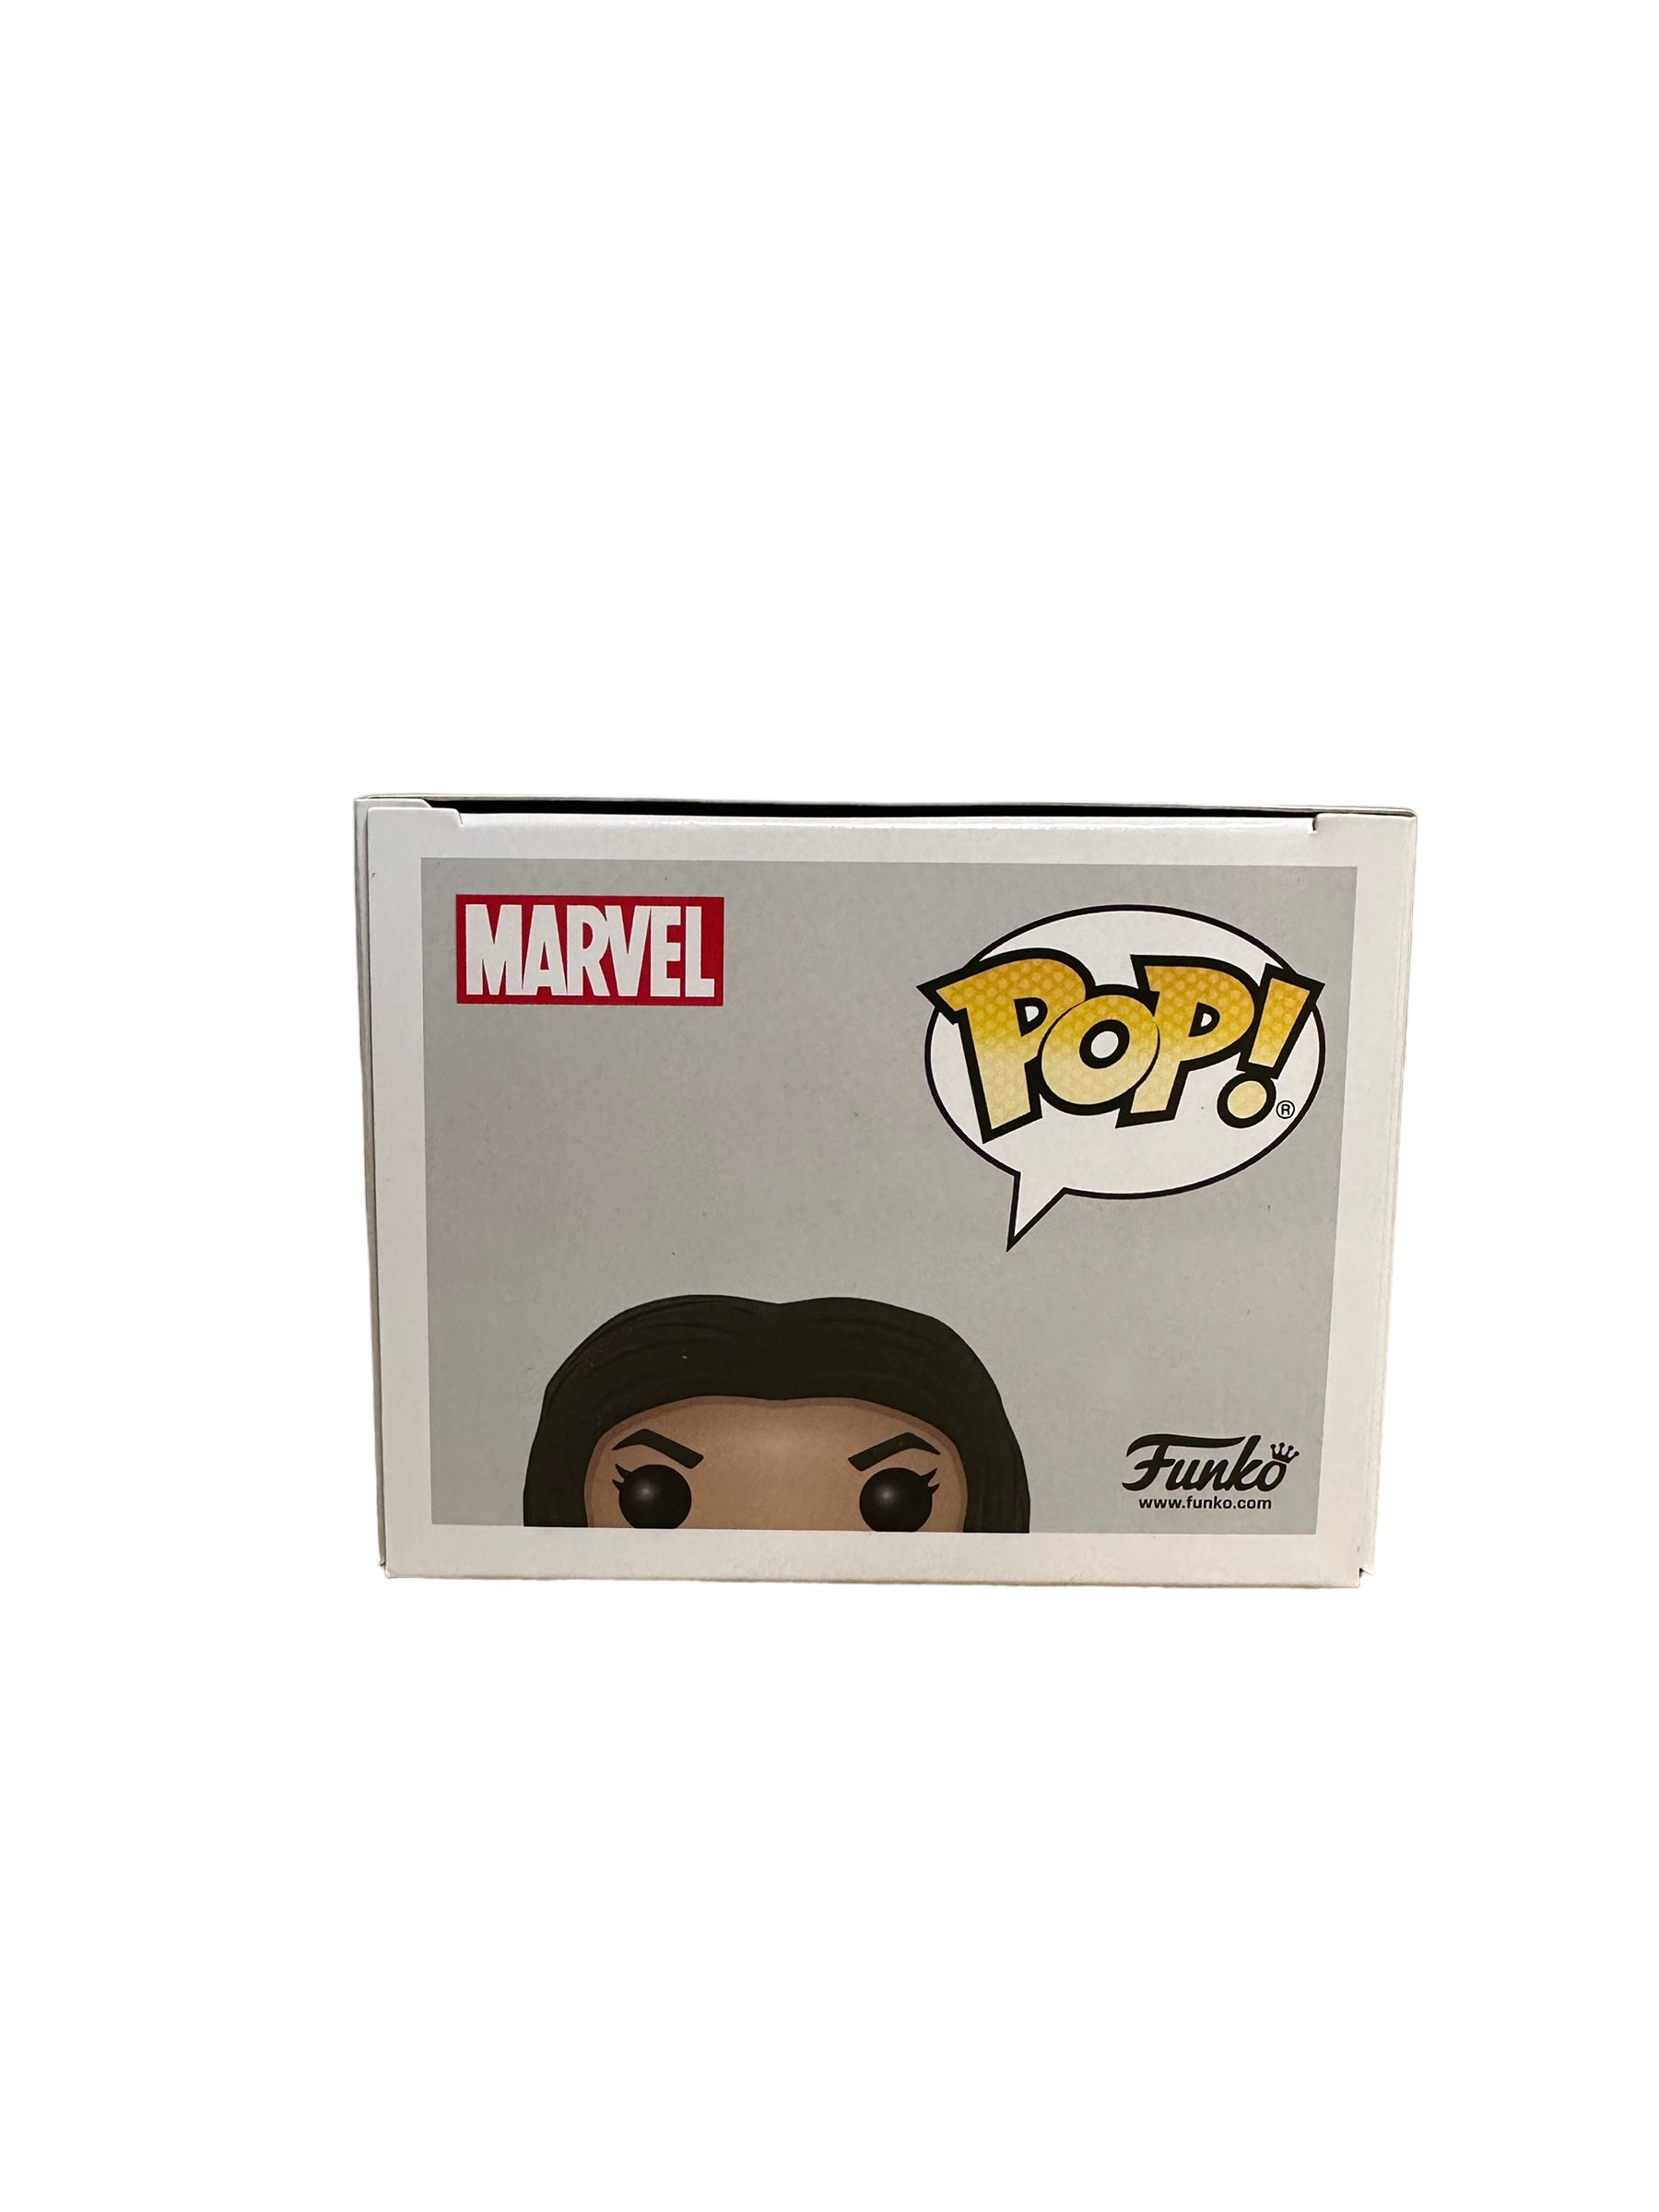 Valkyrie #336 Funko Pop! - Thor Ragnarok - SDCC 2018 Official Convention Exclusive - Condition 8.75/10